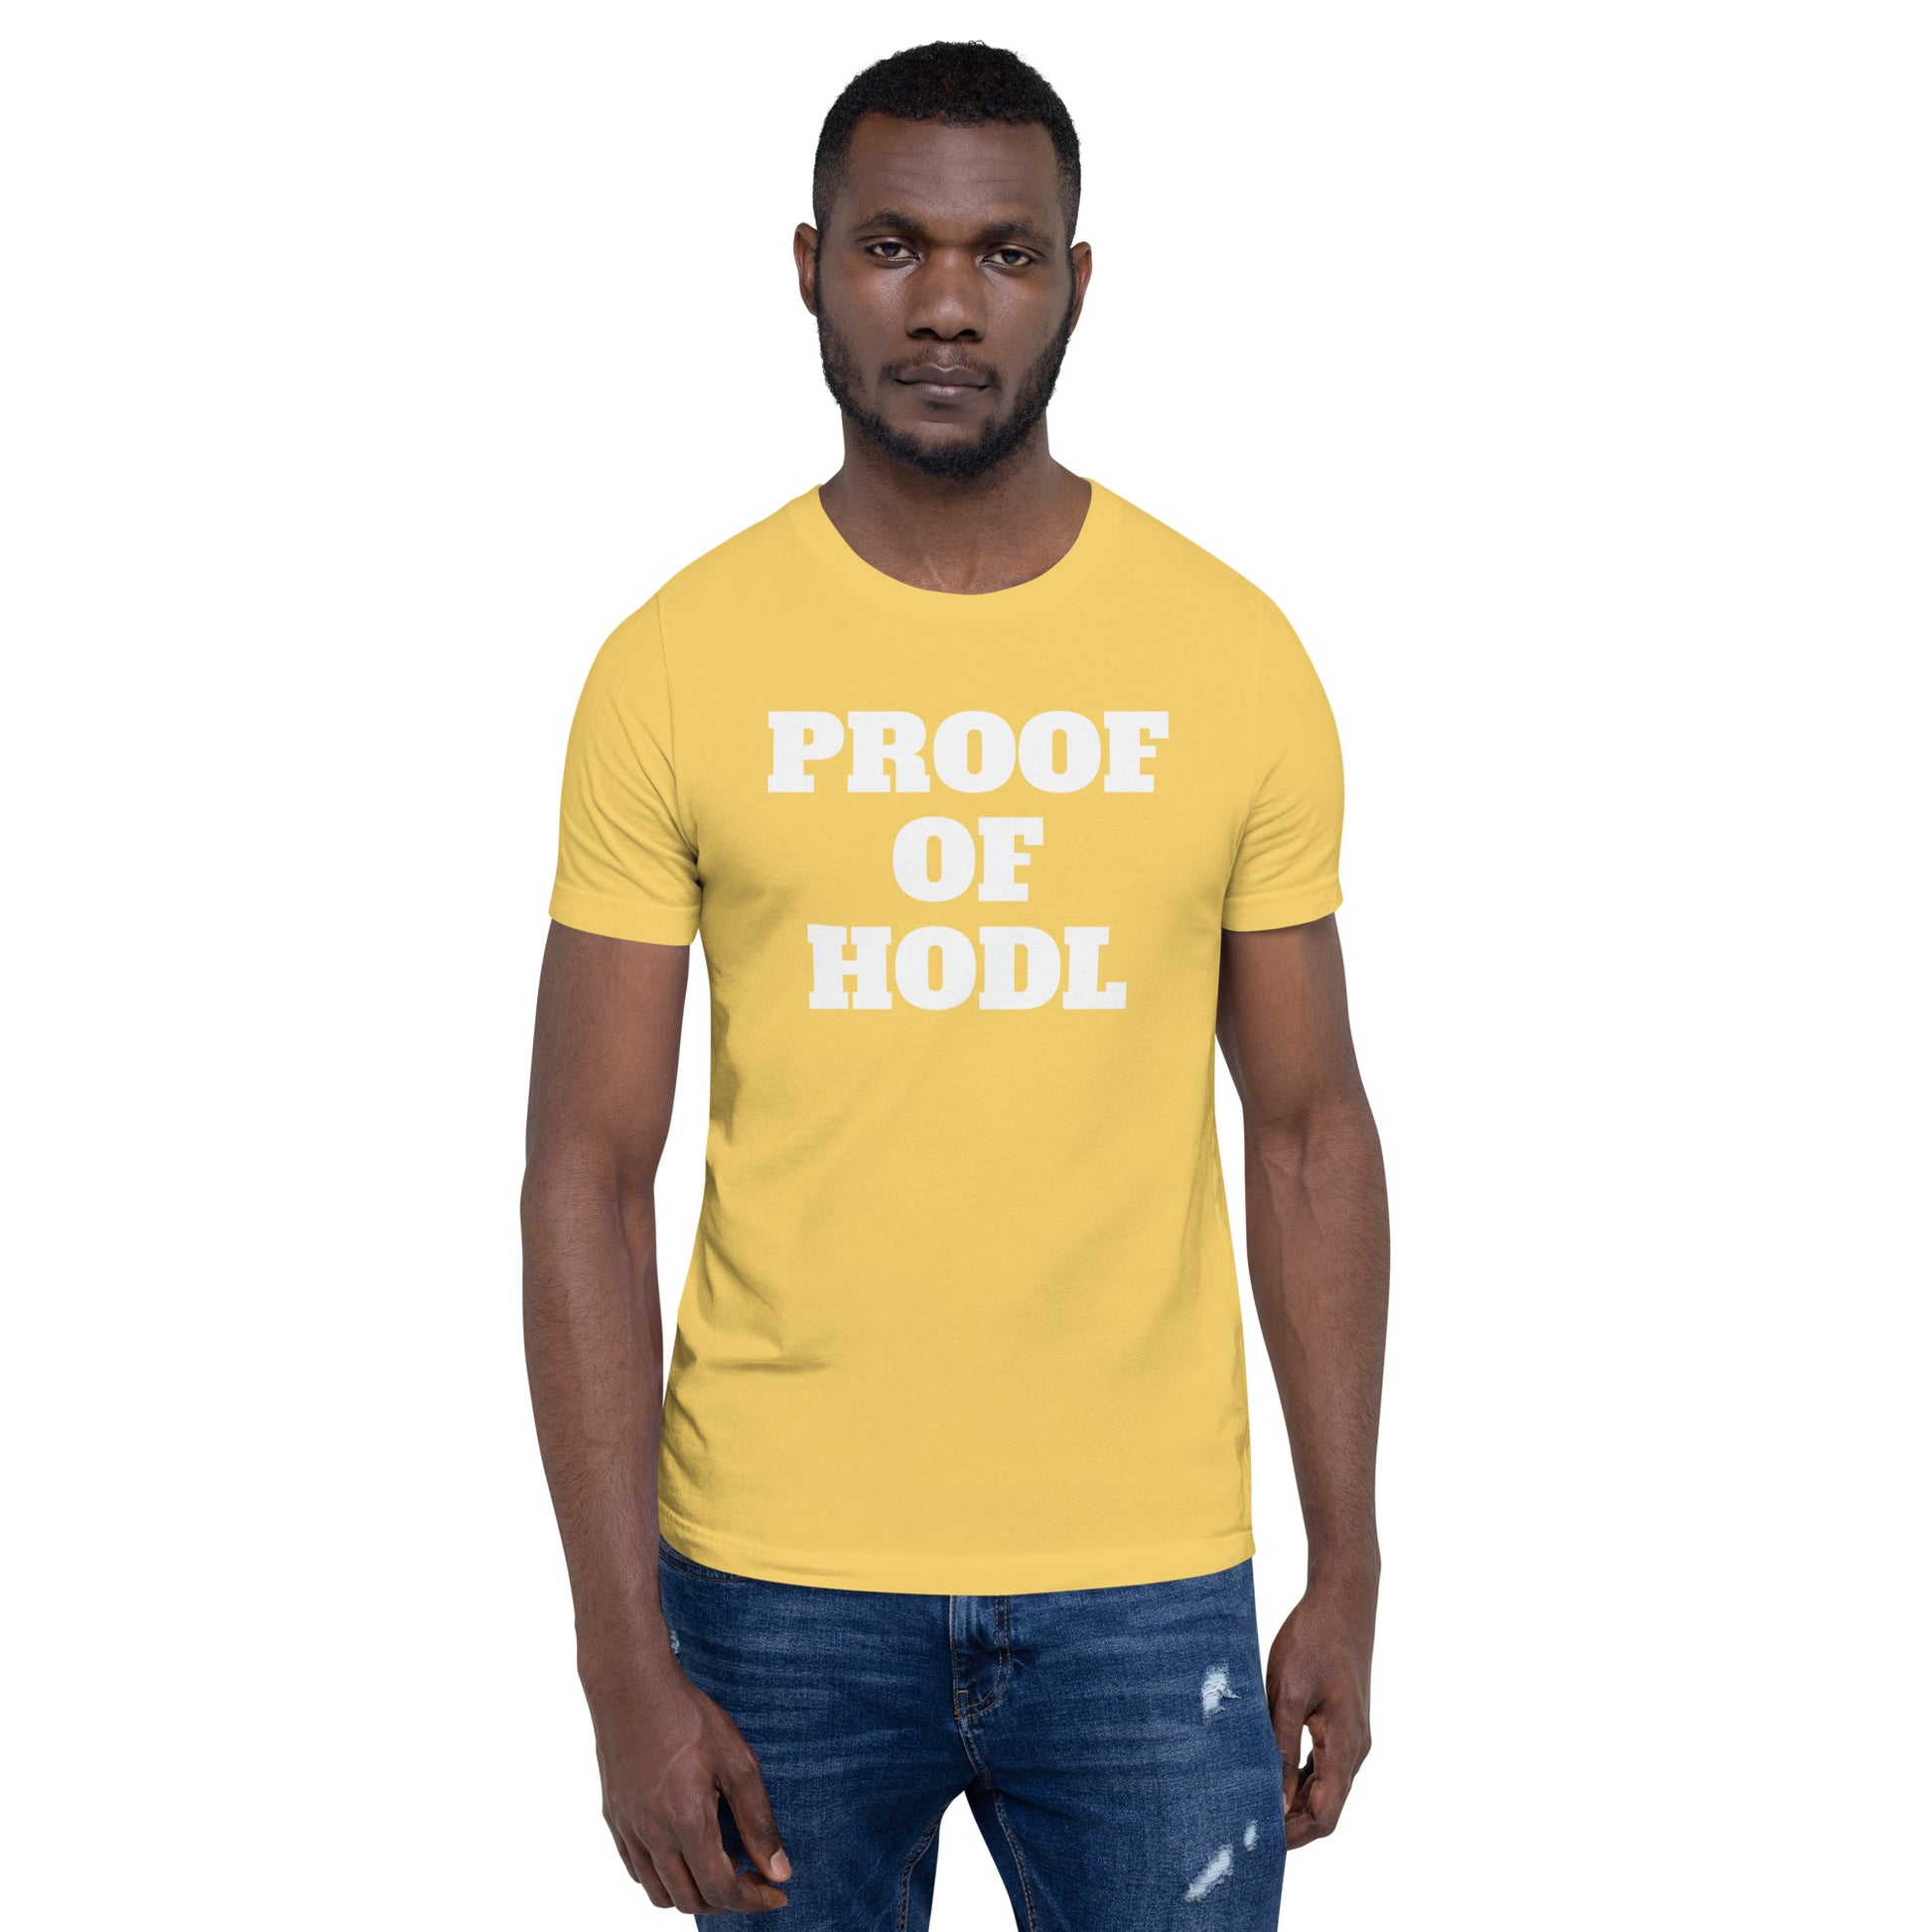 Proof of Hodl | Shirts & Tops | proof-of-hodl-tee | printful